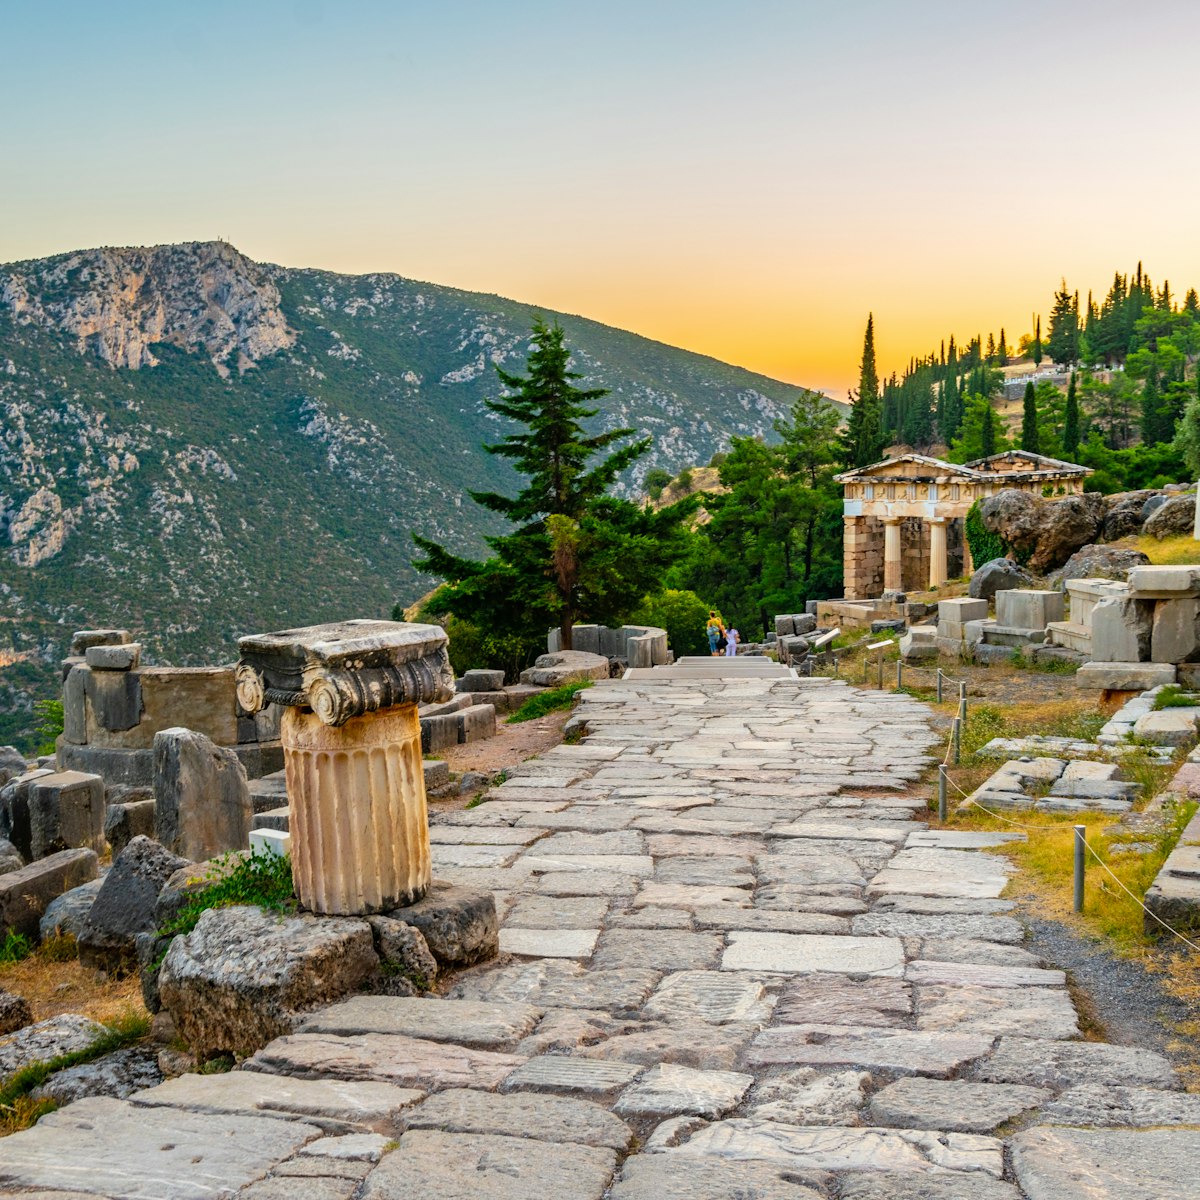 Sunset view of Athenian treasury at the ancient delphi site in Greece